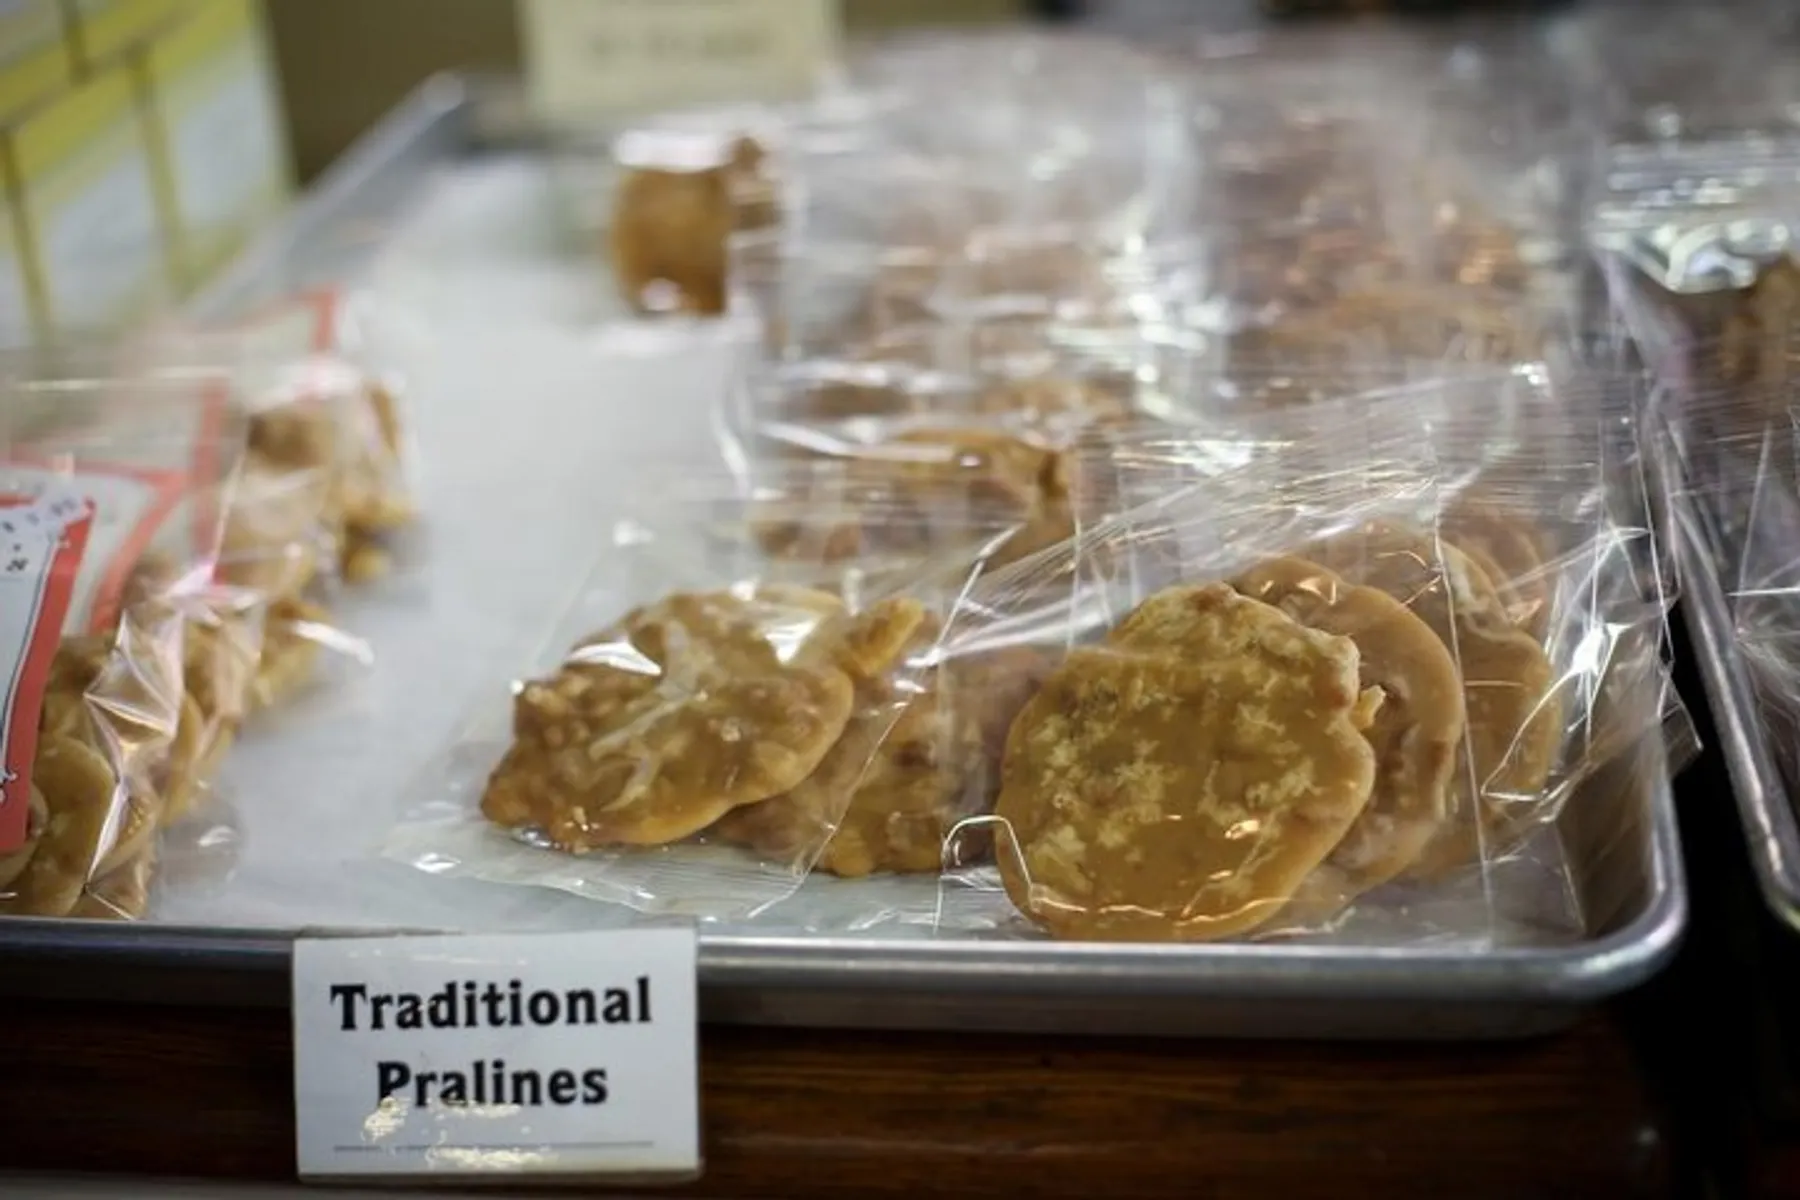 The image shows a tray of traditional pralines individually wrapped in plastic, displayed for sale with a label in front.